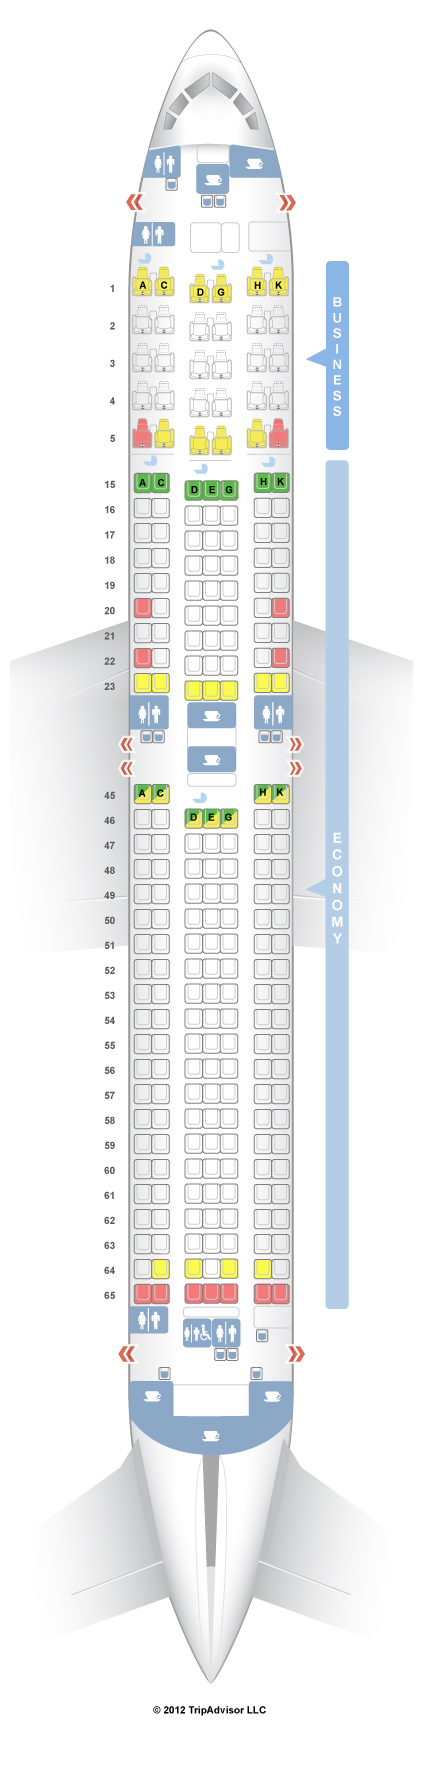 Boeing 767 400 Seating Chart